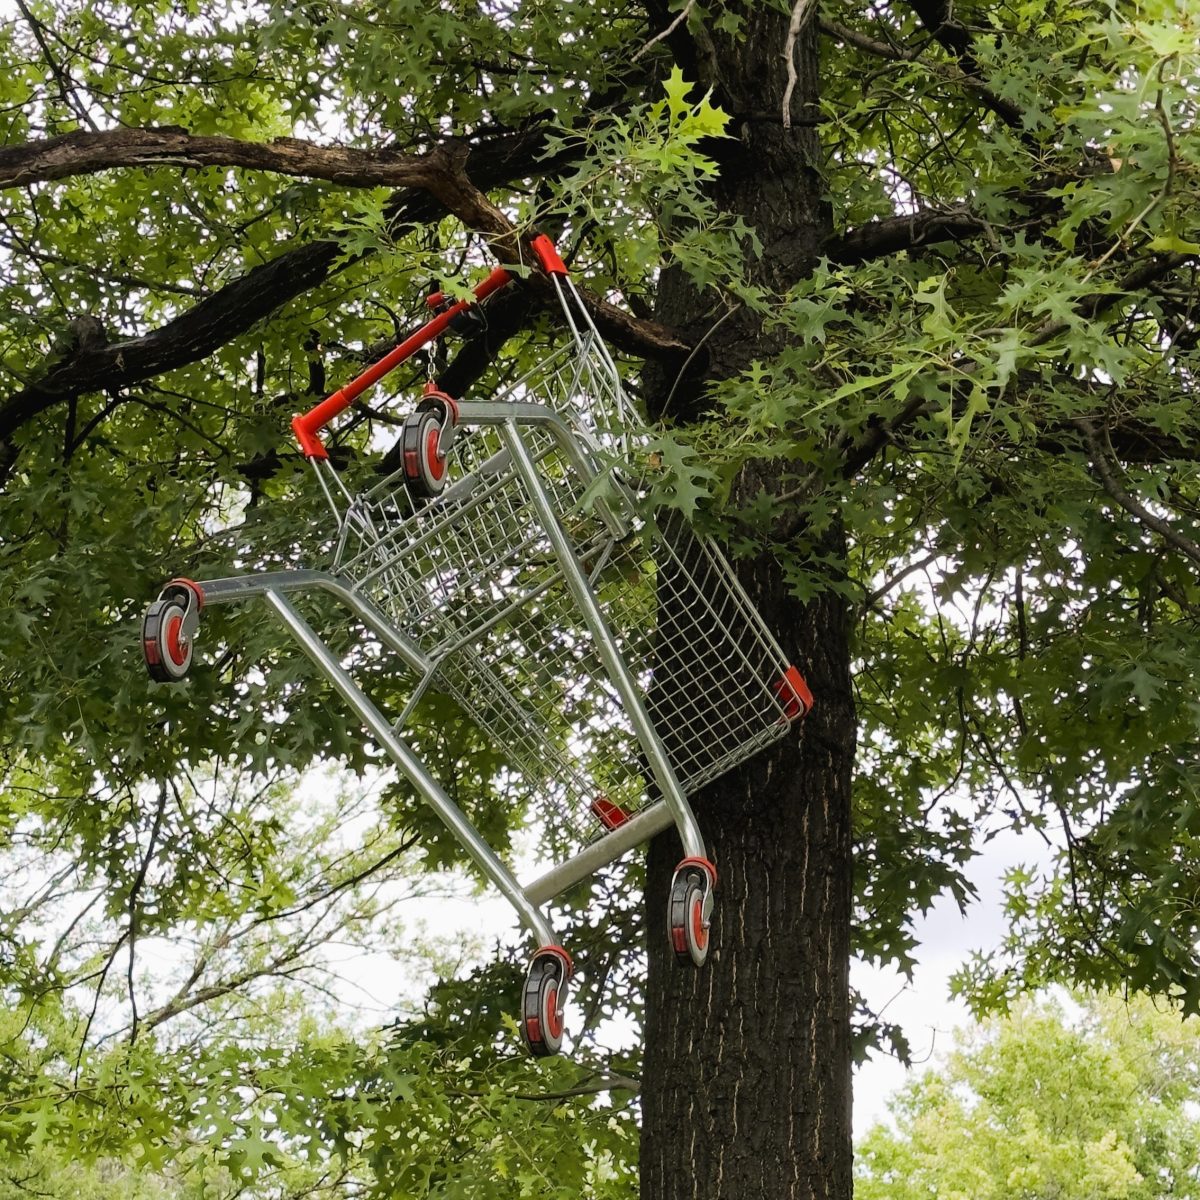 shopping trolley in a tree